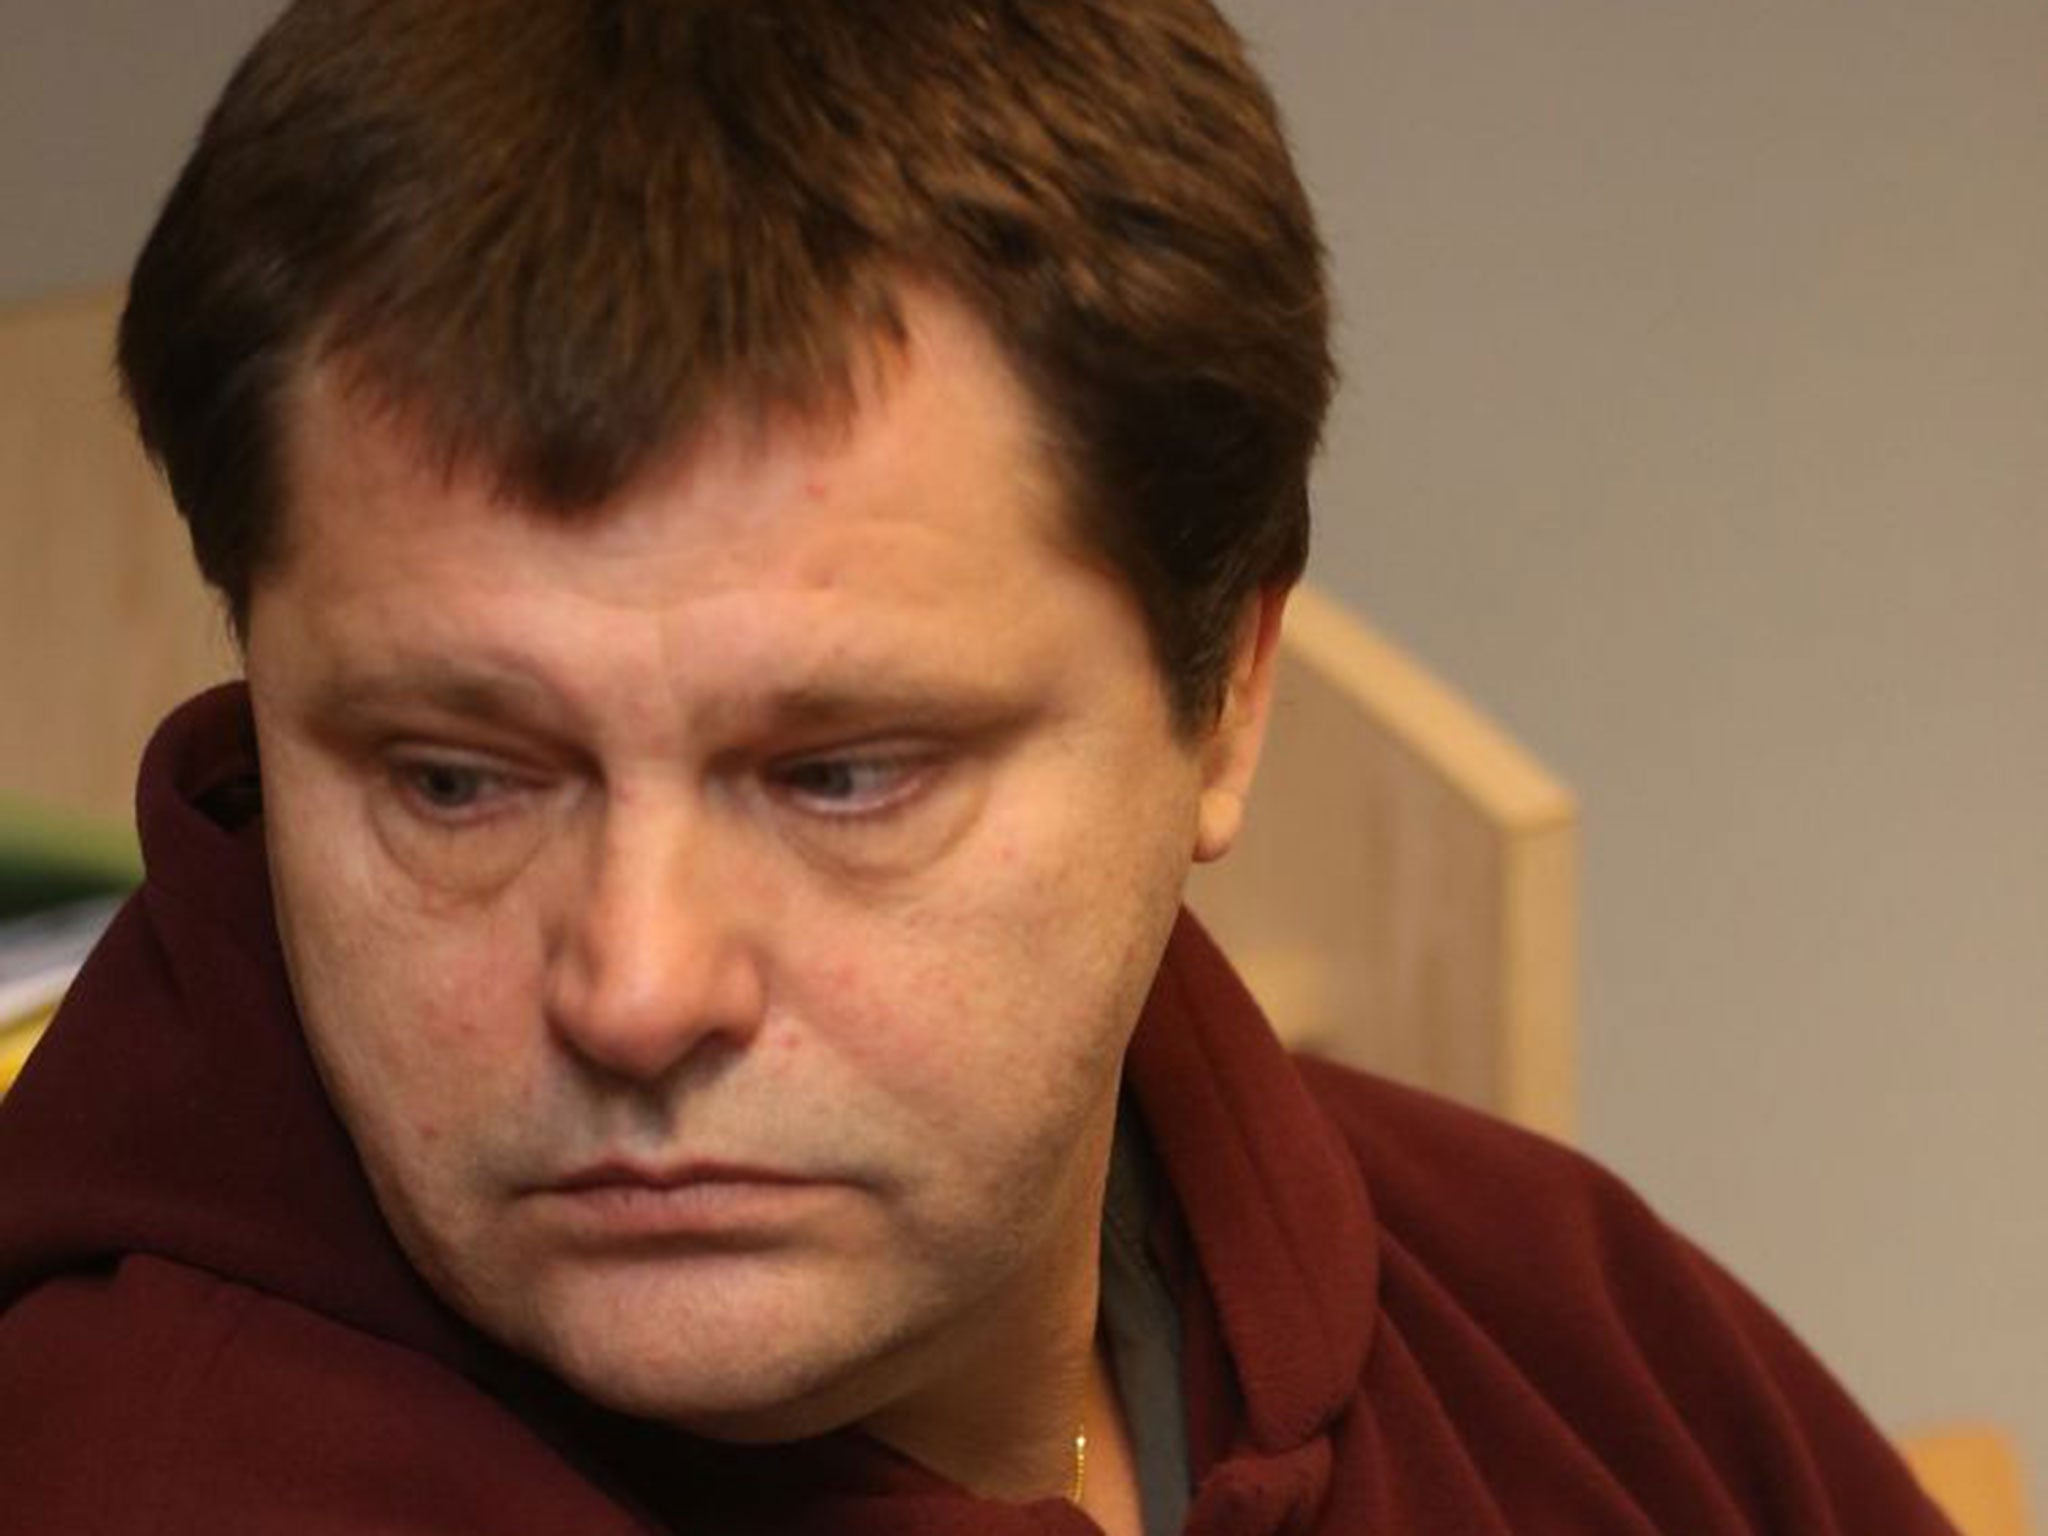 Frank Van Den Bleeken, who has already served 30 years for murder, doesn’t want to rot in jail